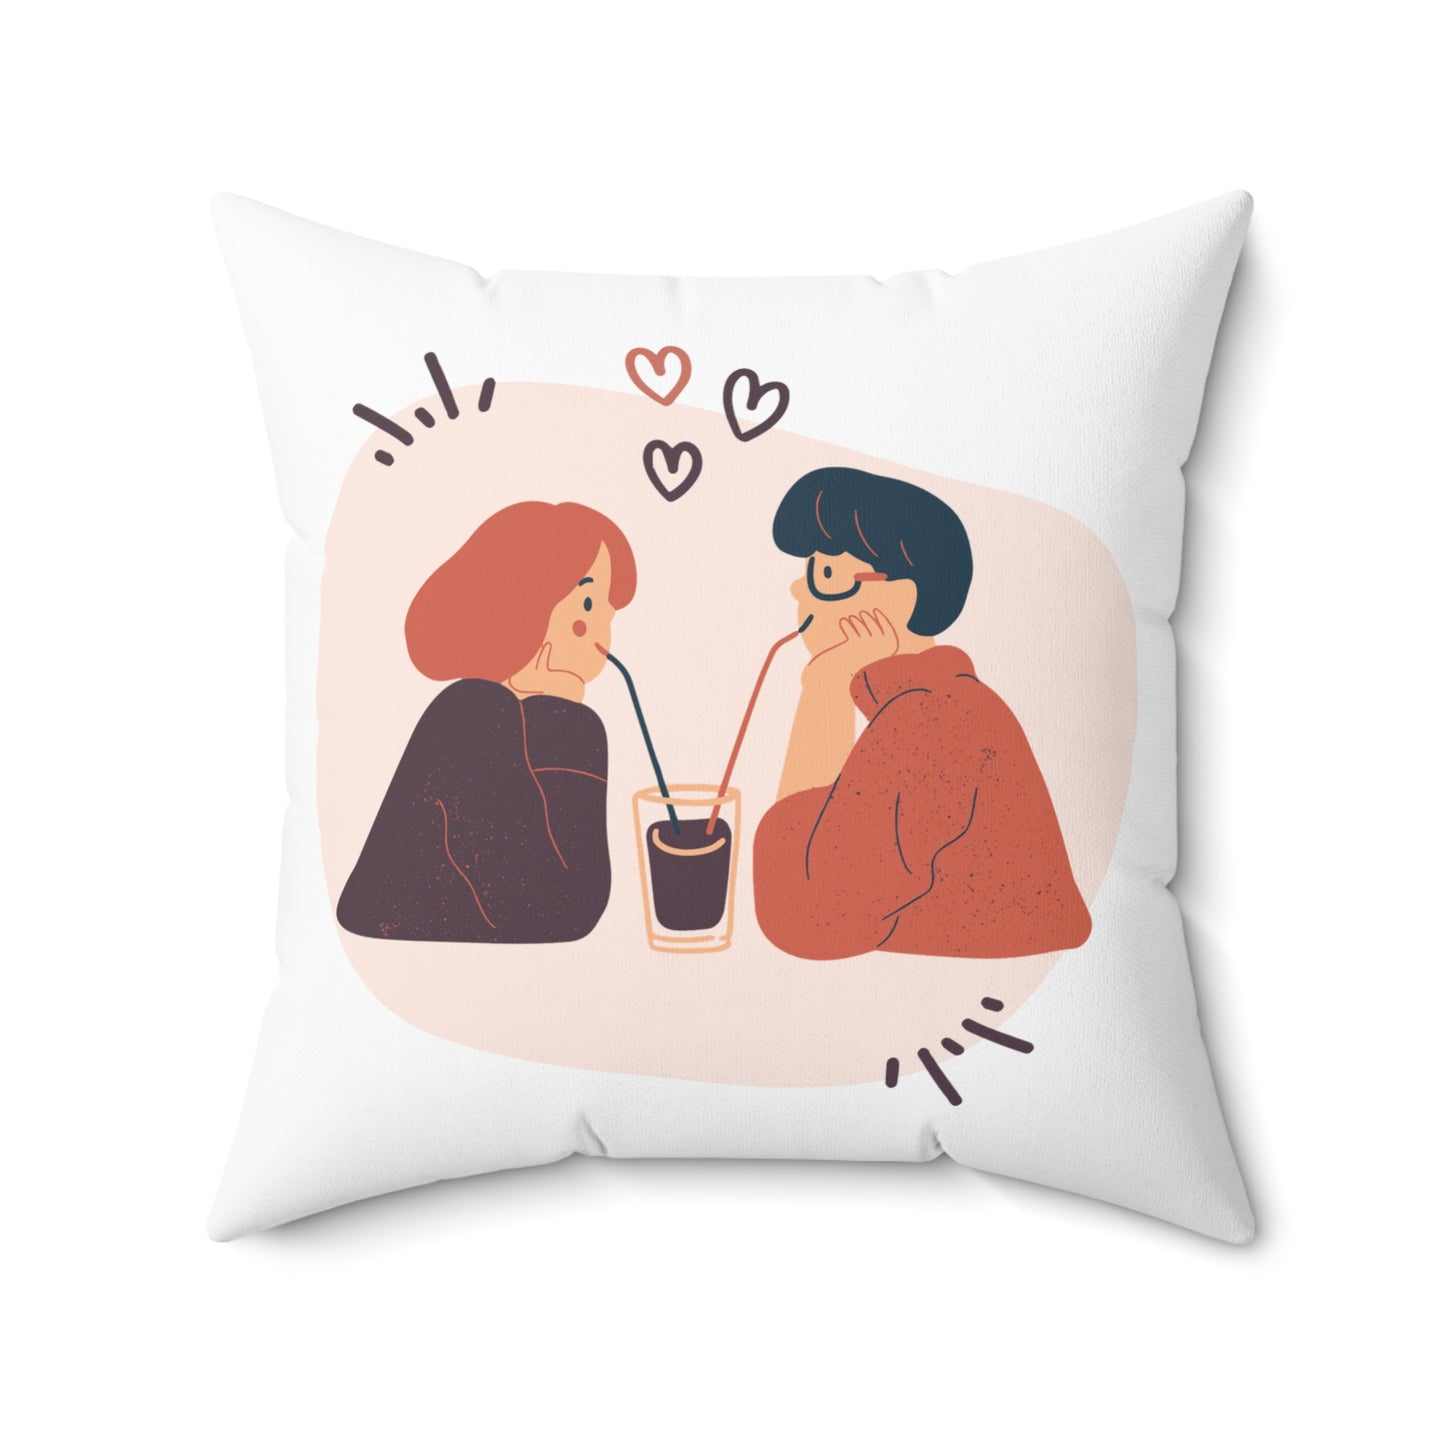 Couple on Cycle Printed Sqaure Pillow Case for Valentine